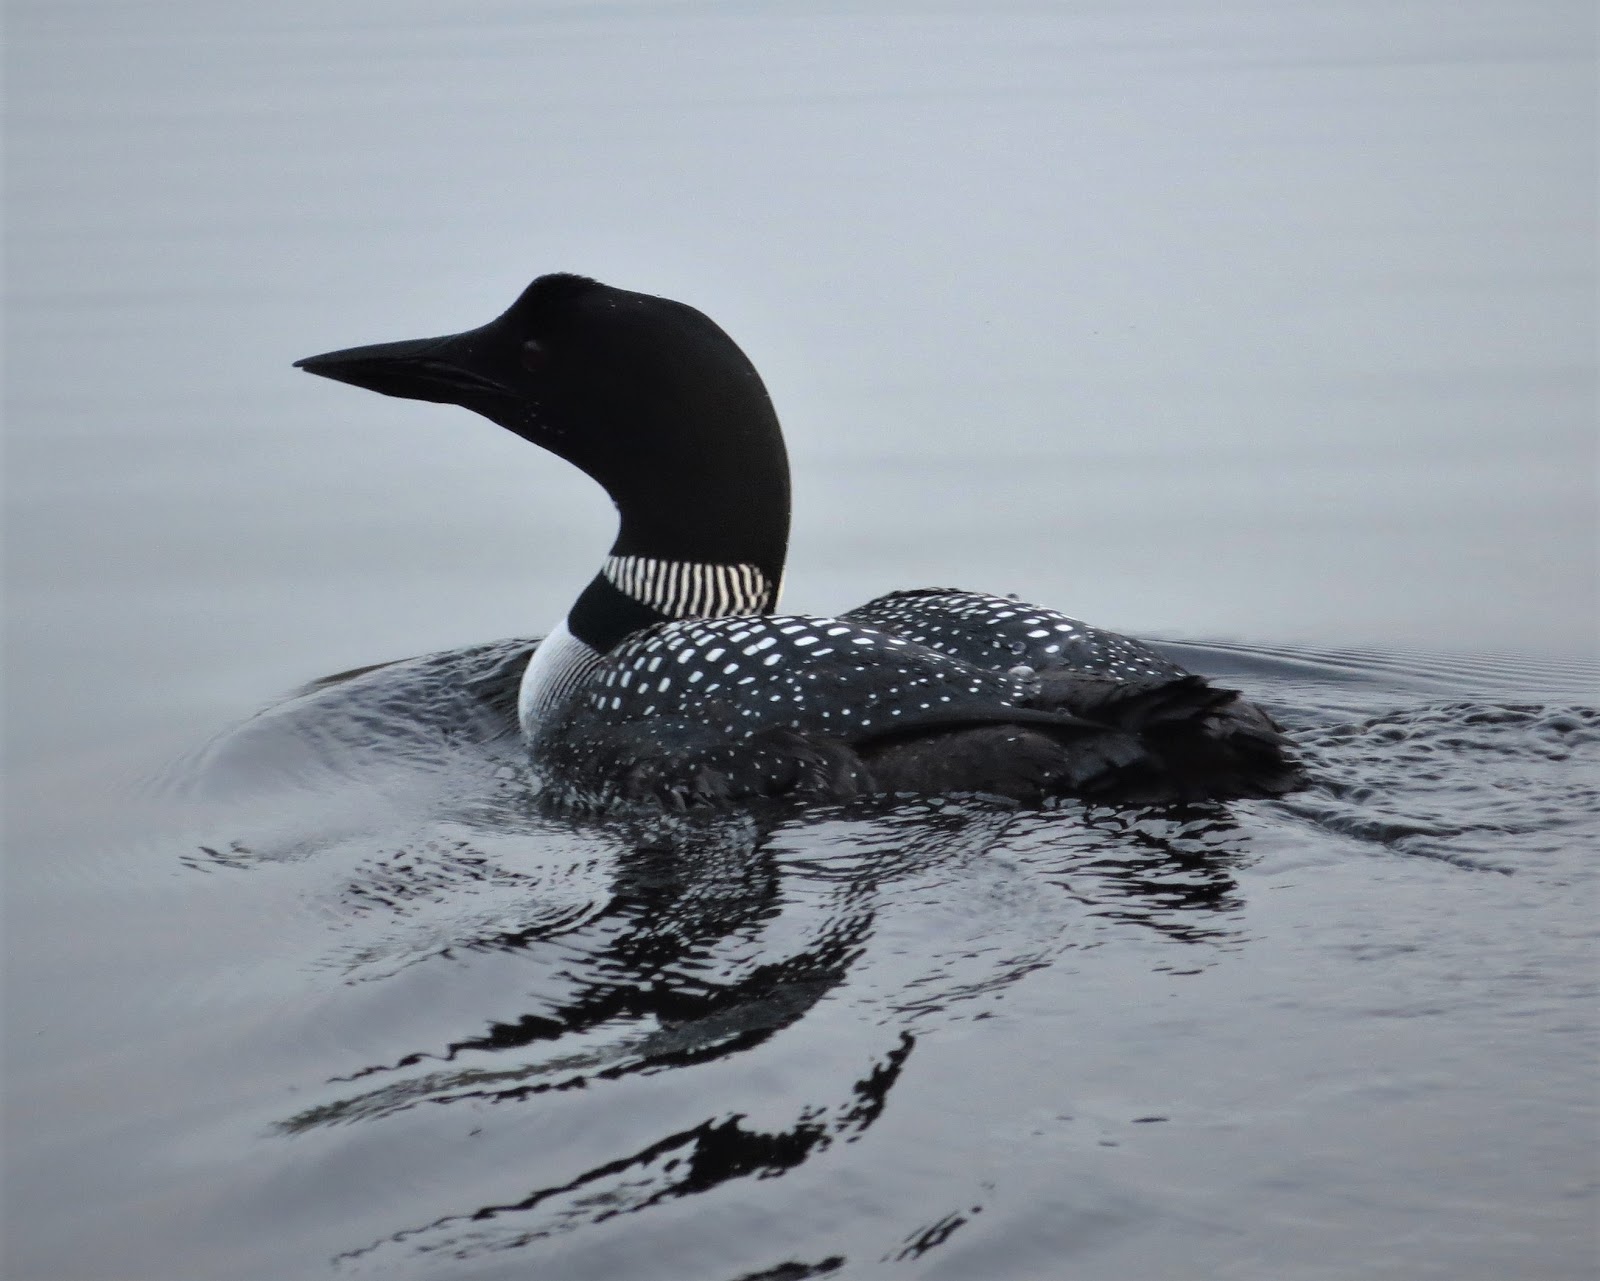 Compare loons’ lifespan to other birds